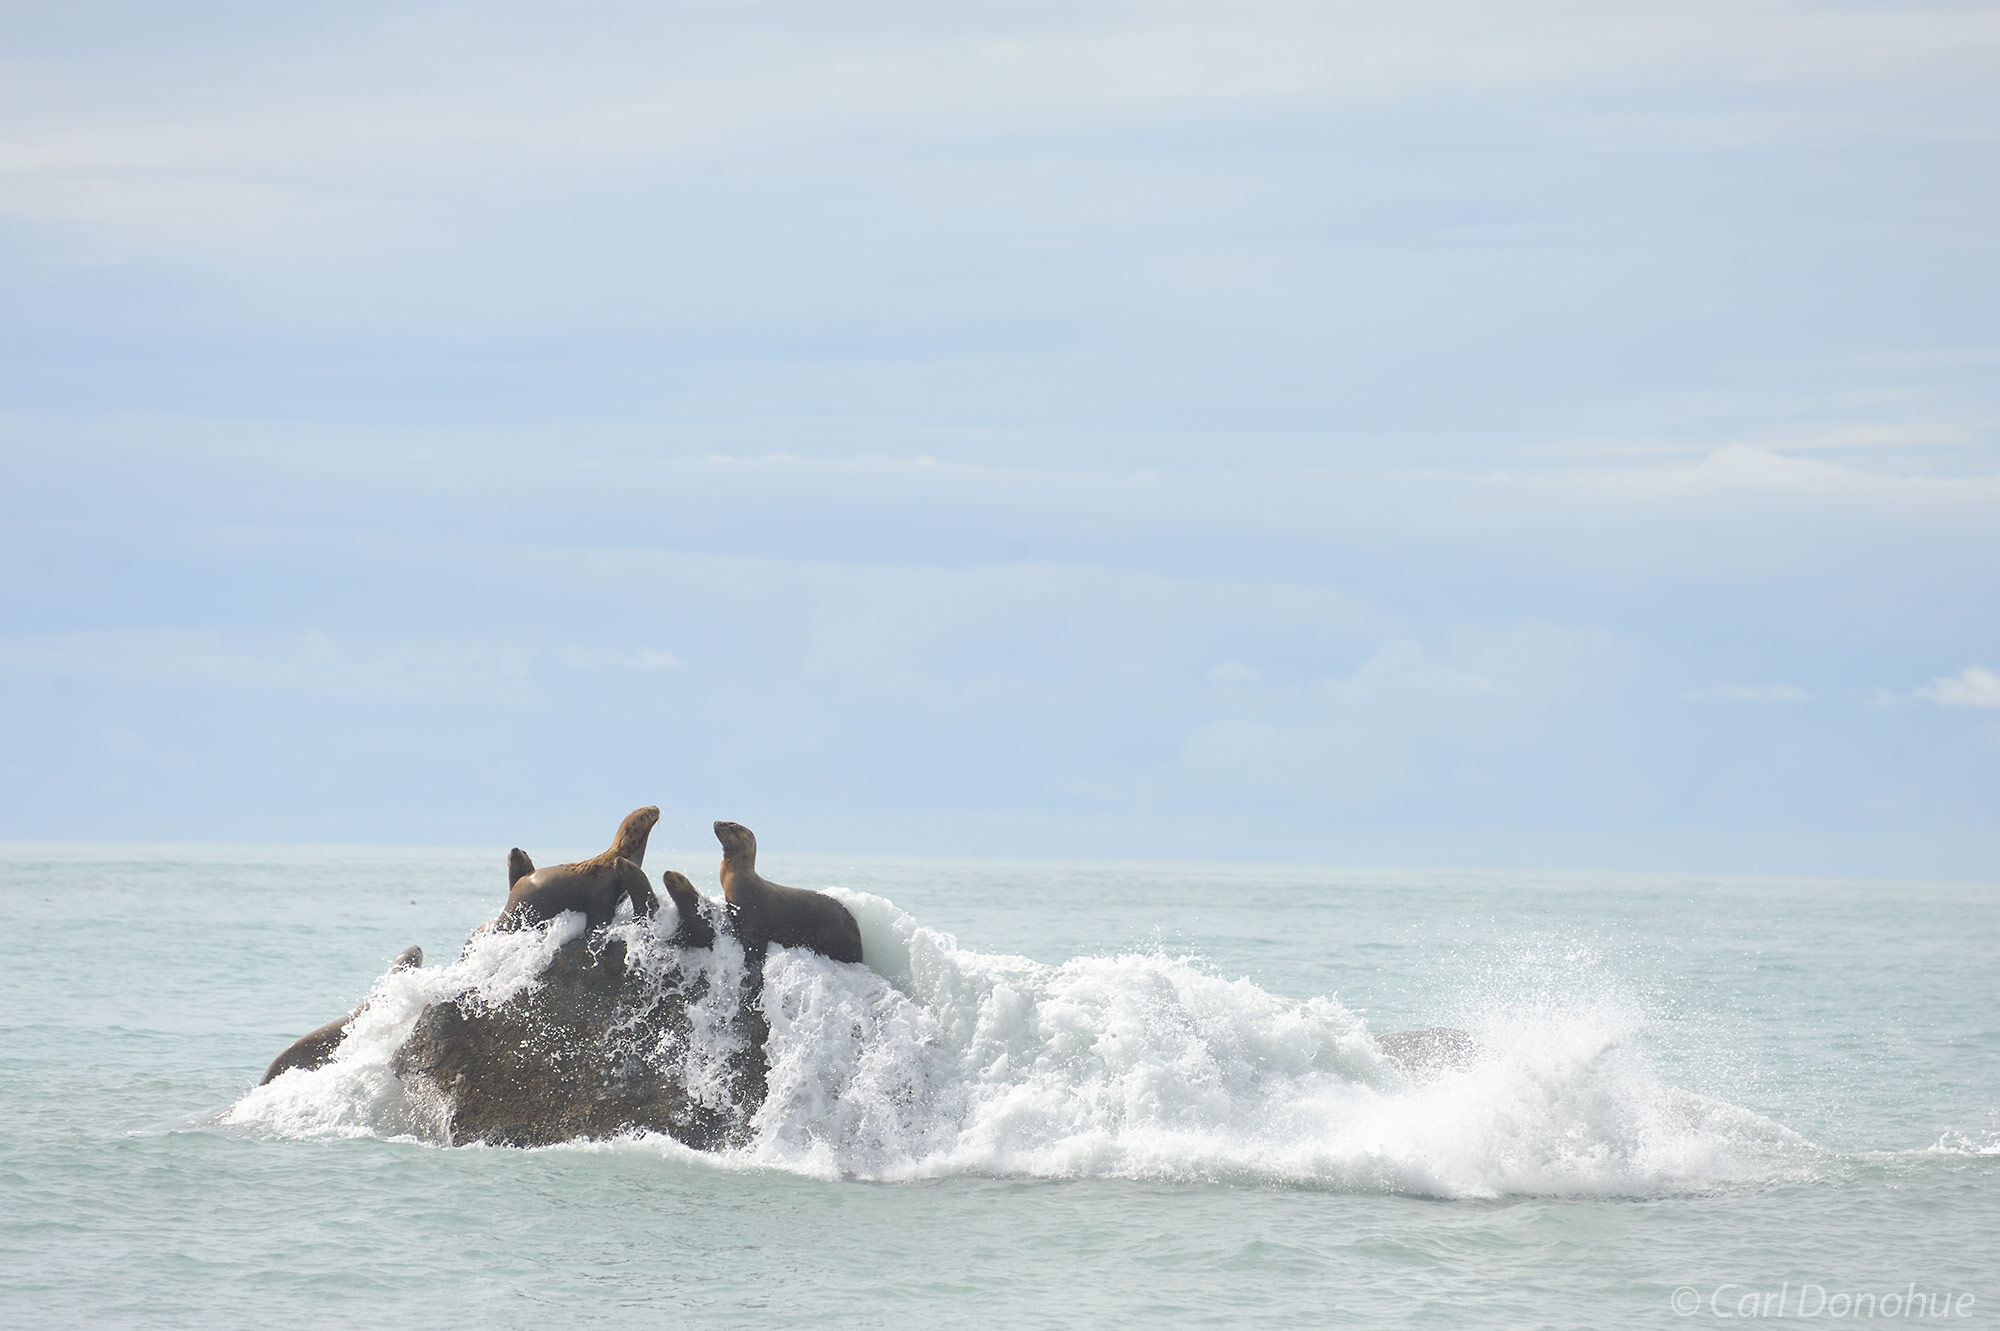 Steller sea lions hauled on a rock offshore, waves crashing over them,  from Malaspina Glacier, Wrangell - St. Elias  National...